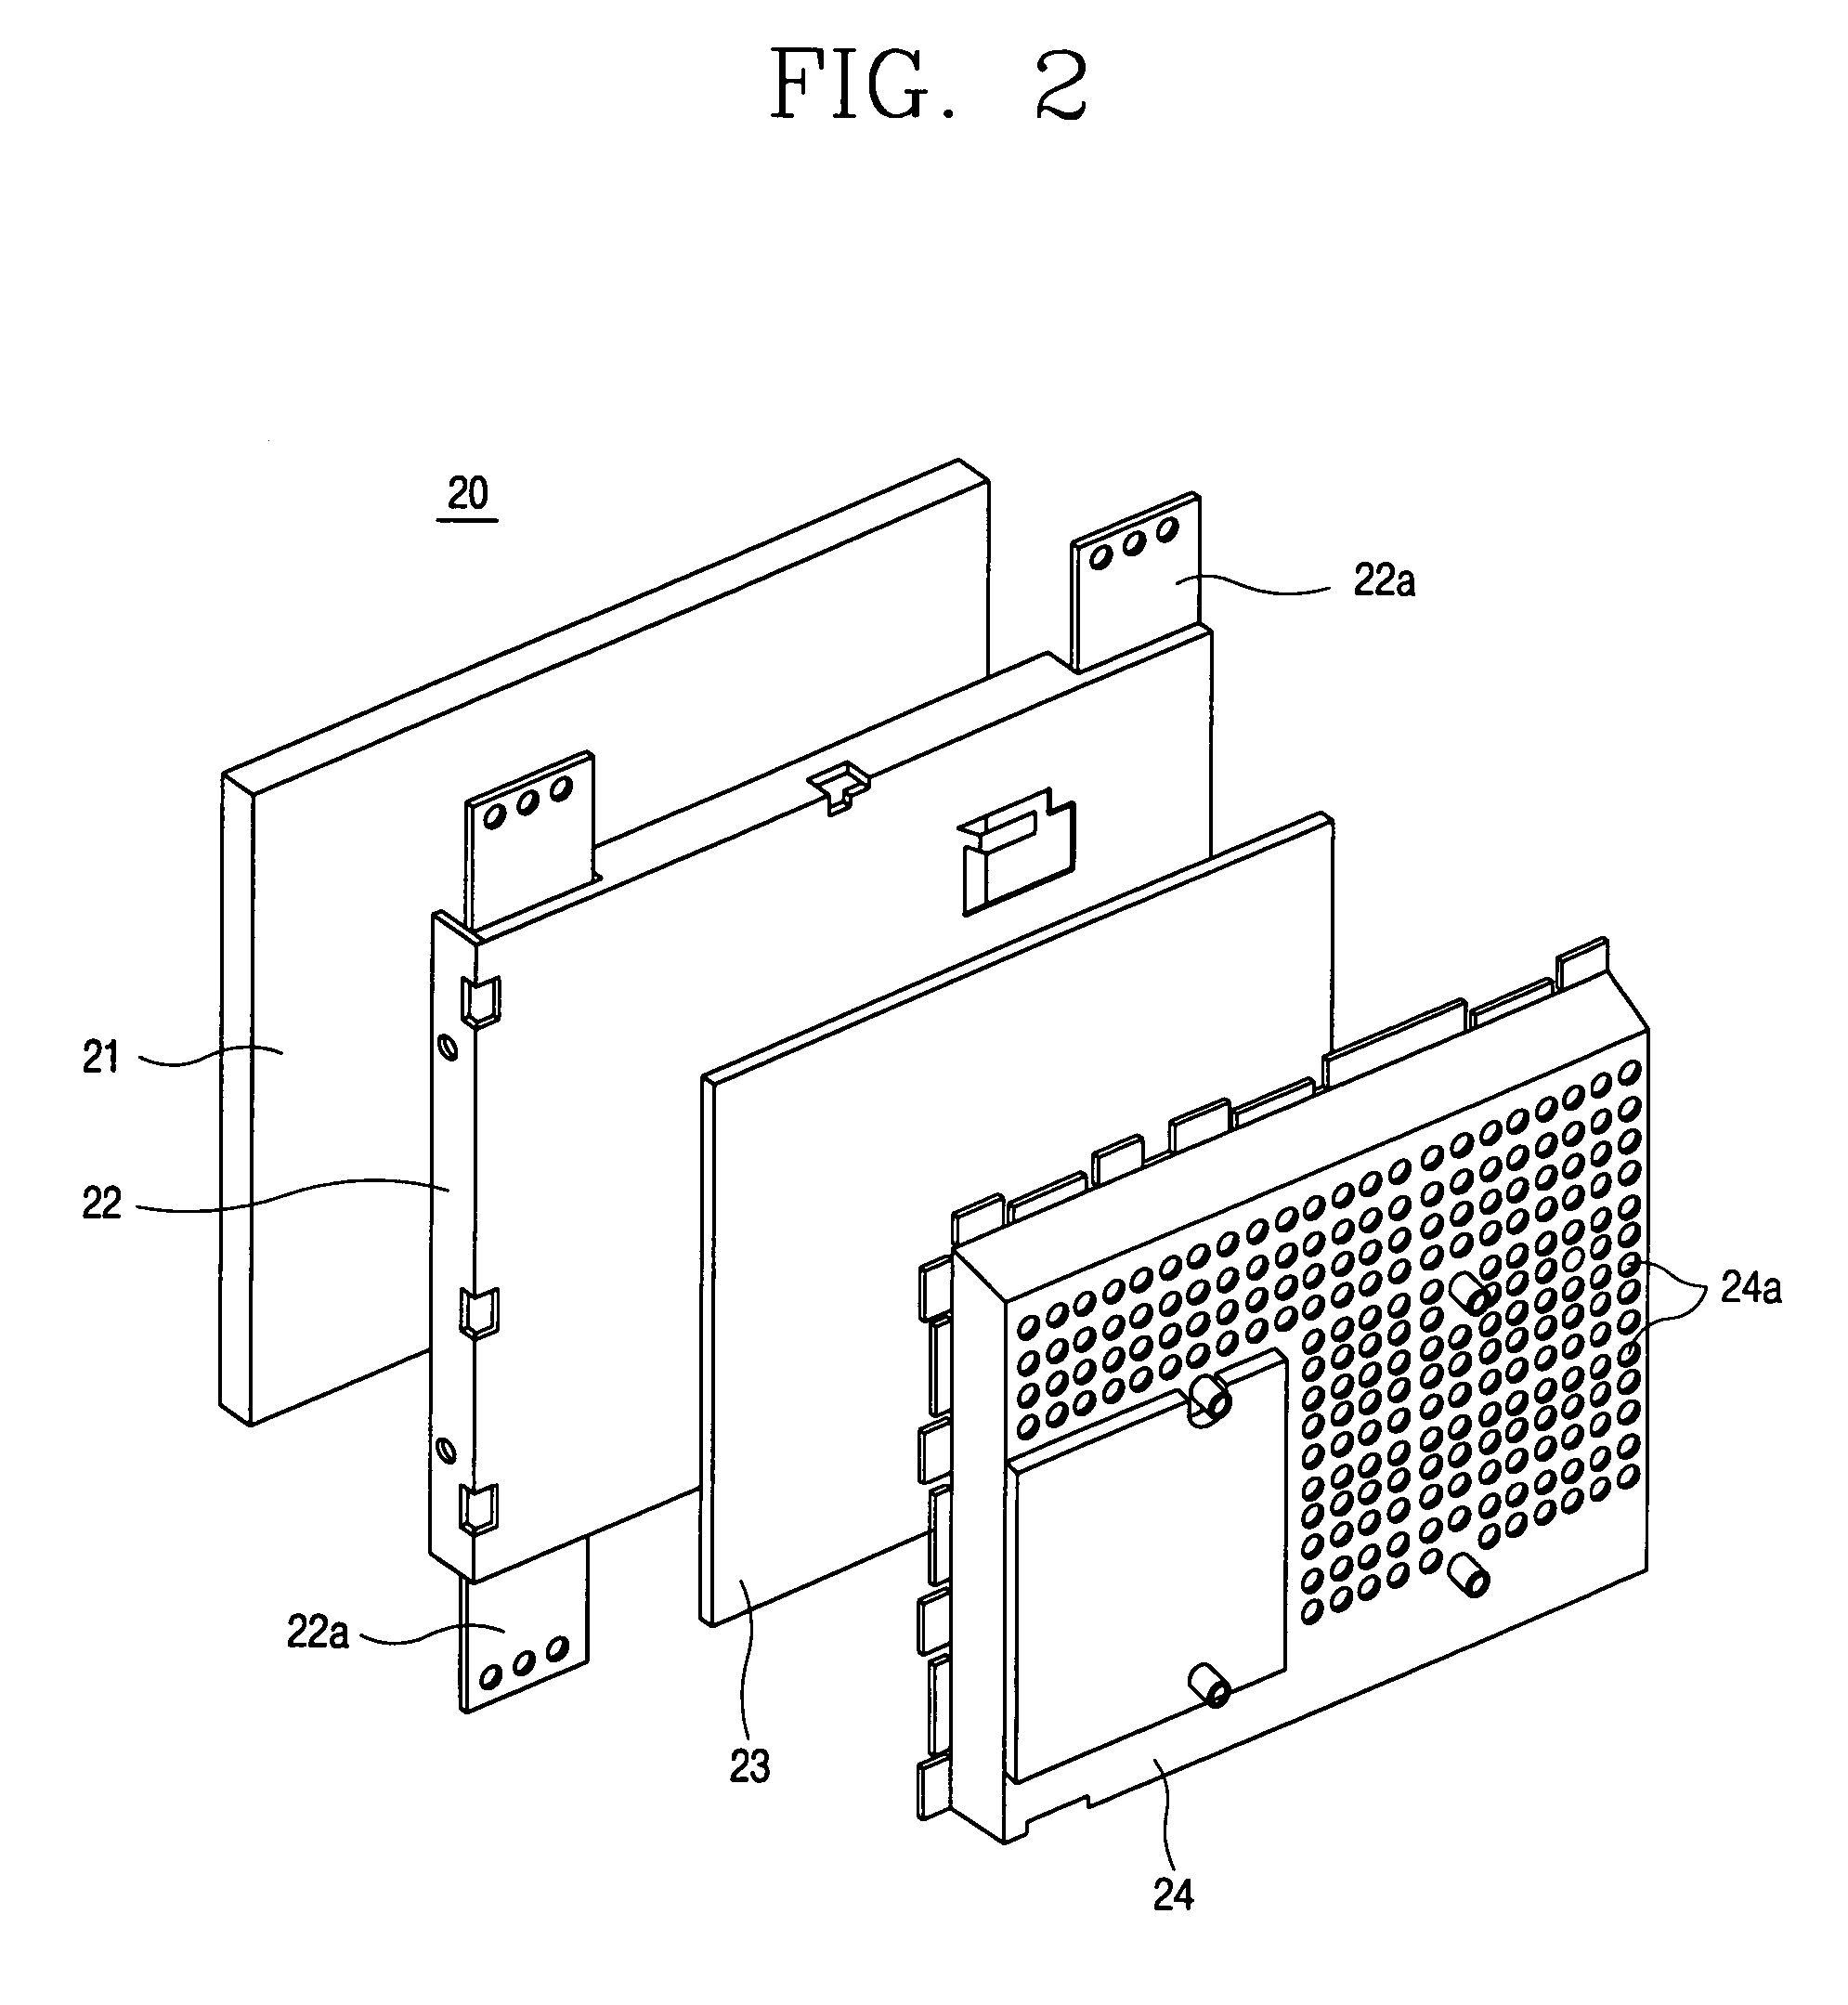 Refrigerator with television